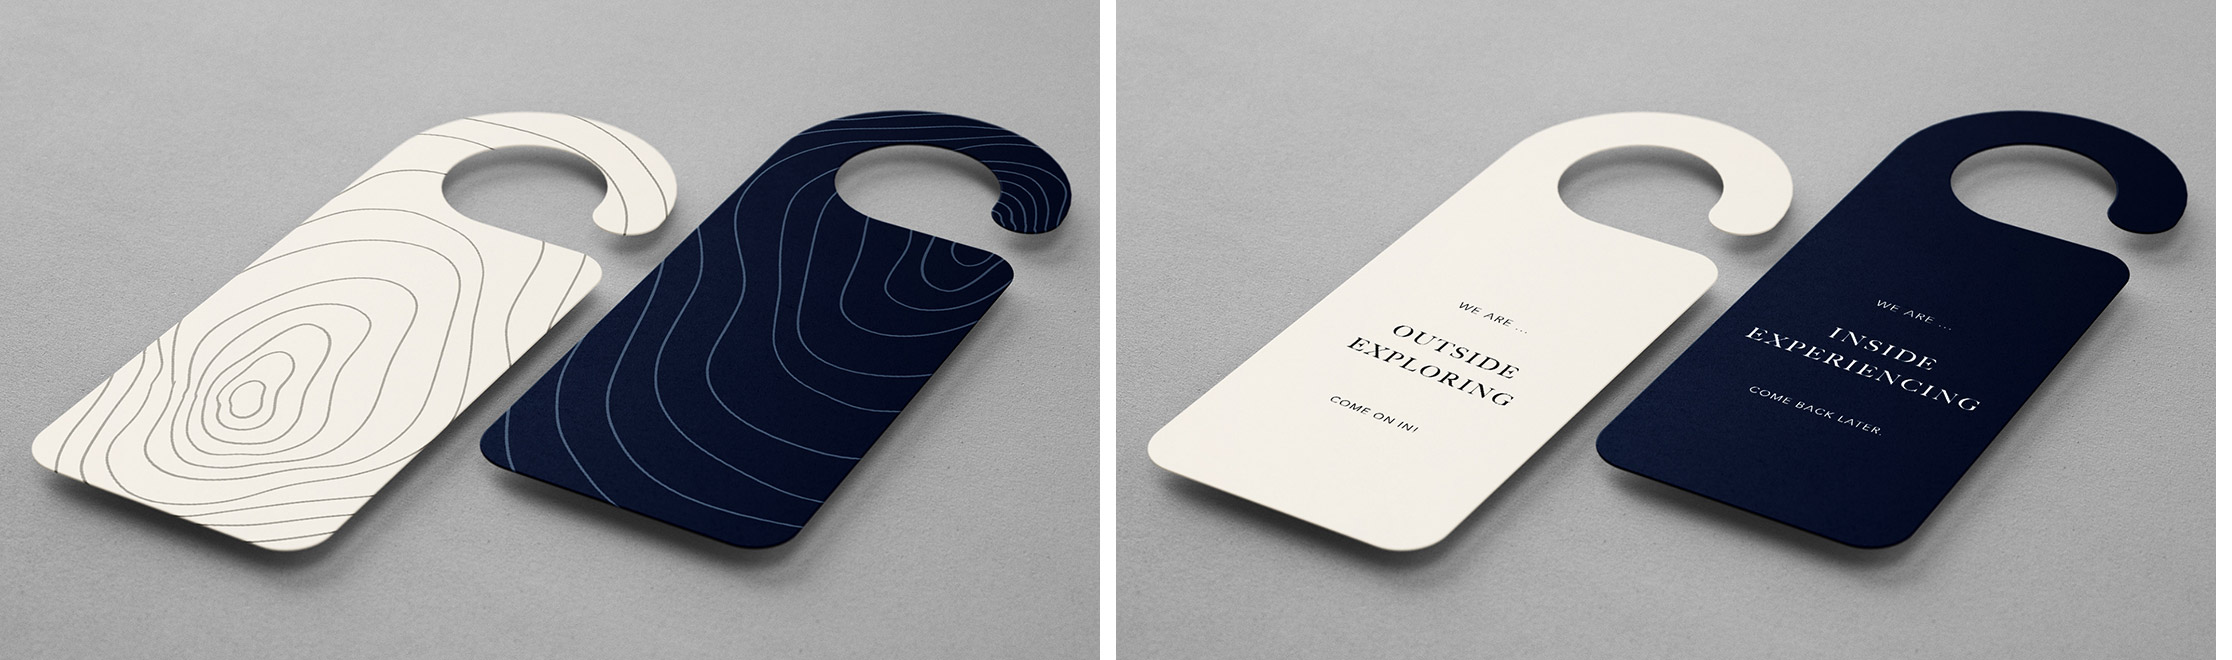 Mock-up visual identity applied to hotel room do not disturb signs